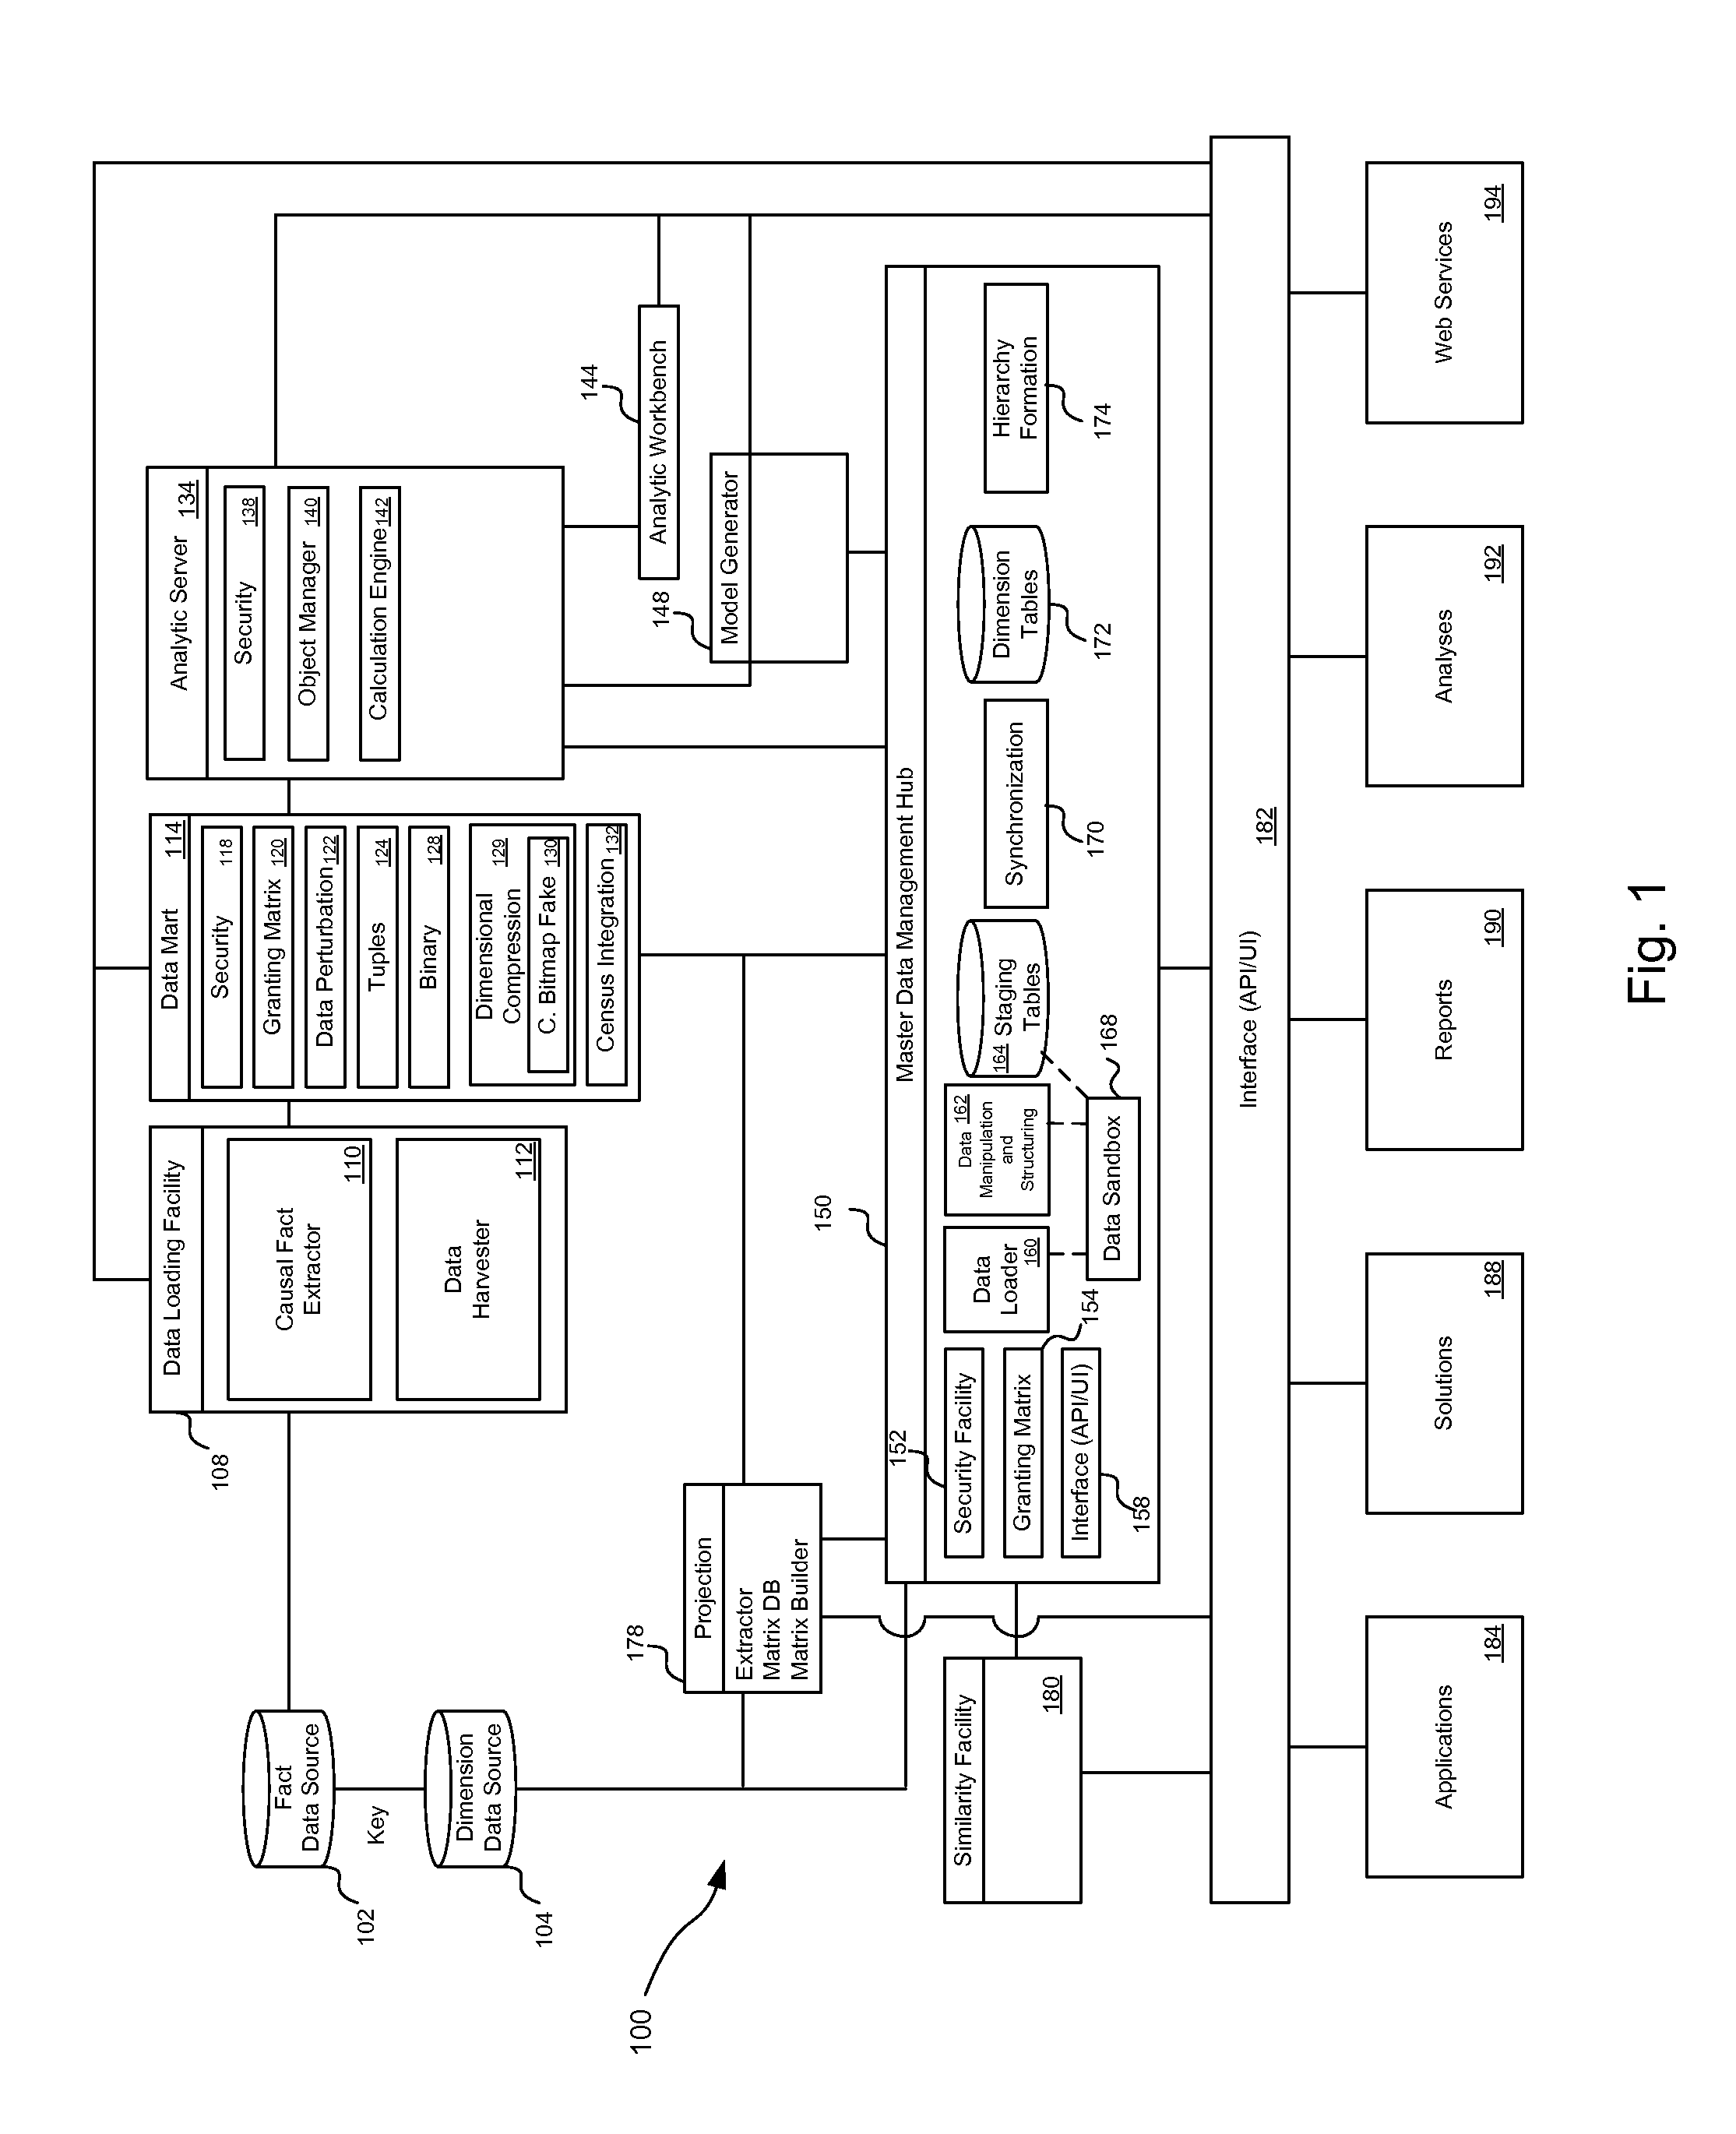 Cluster processing of a core information matrix